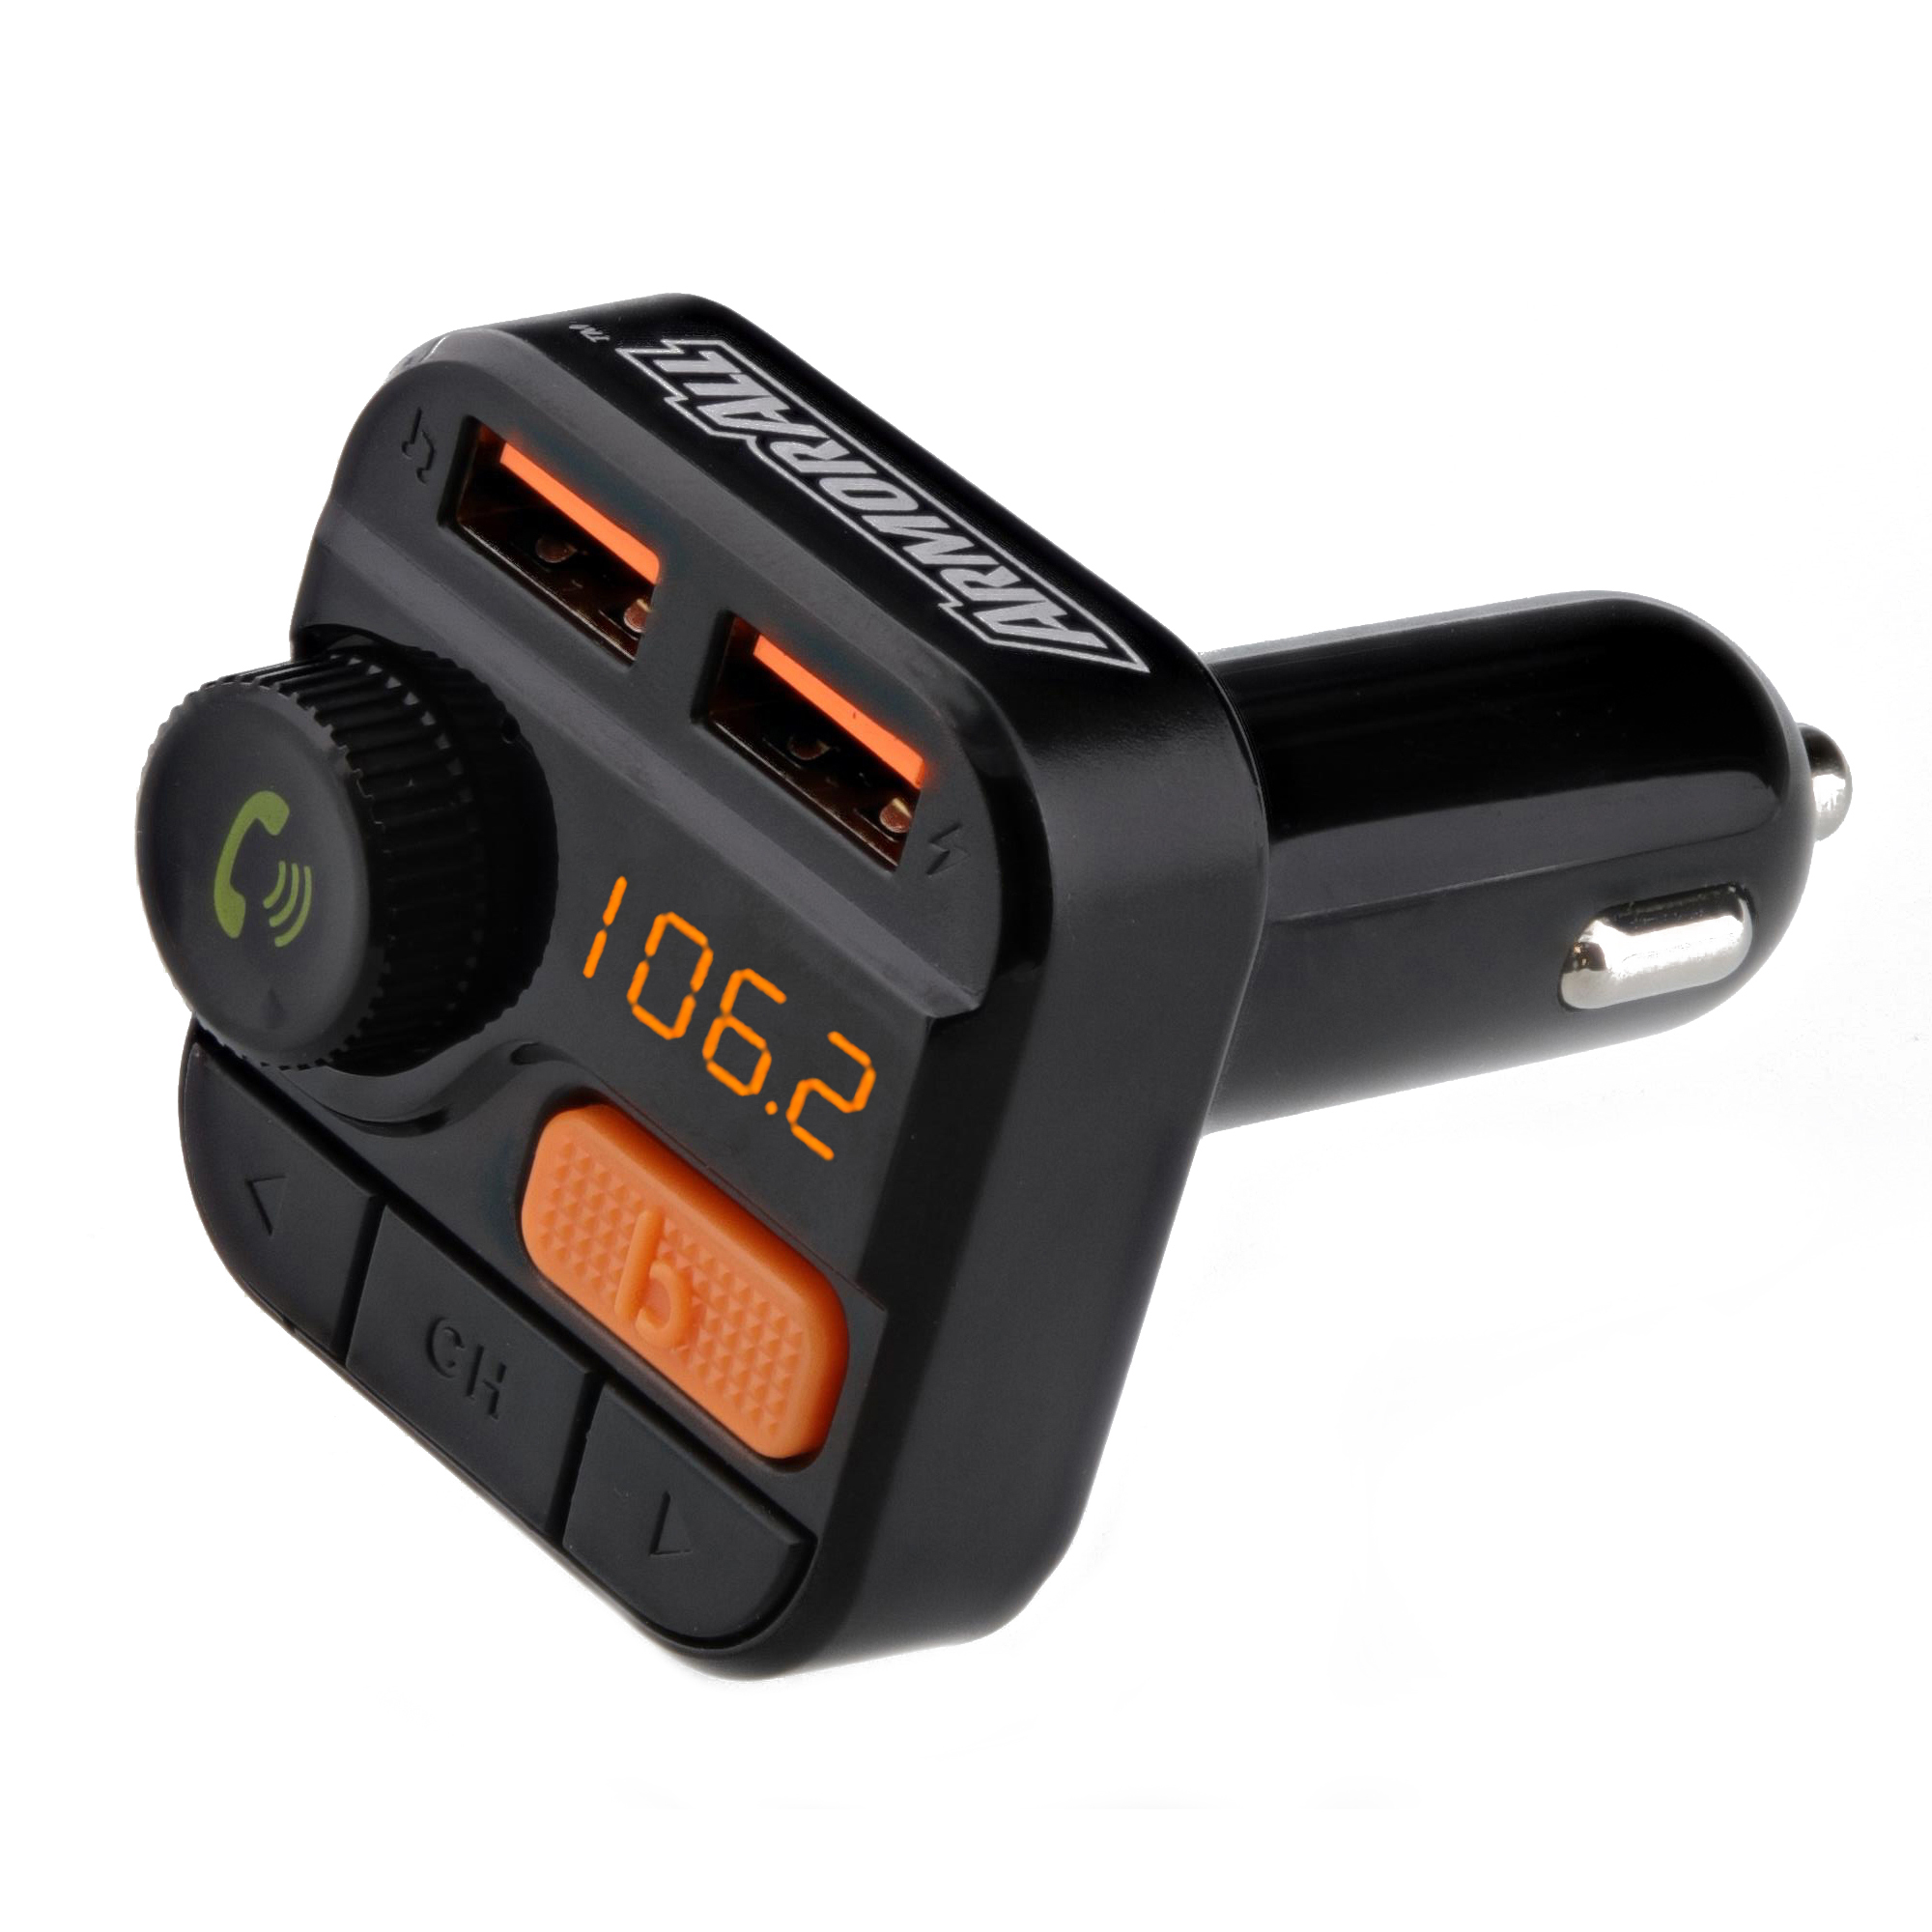 3.4Amp Bluetooth FM Transmitter & Car Charger - Armor All